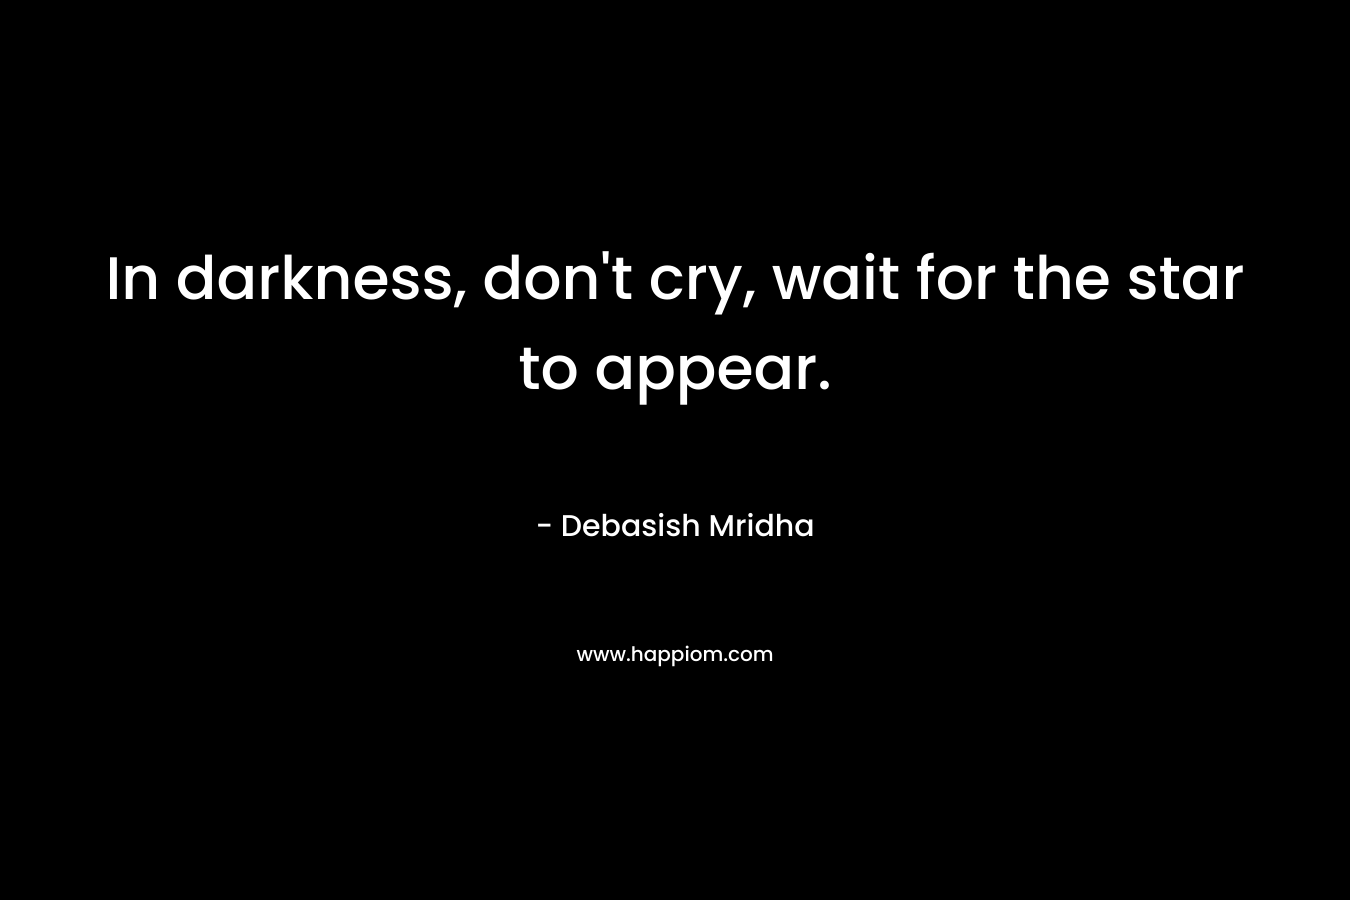 In darkness, don't cry, wait for the star to appear.